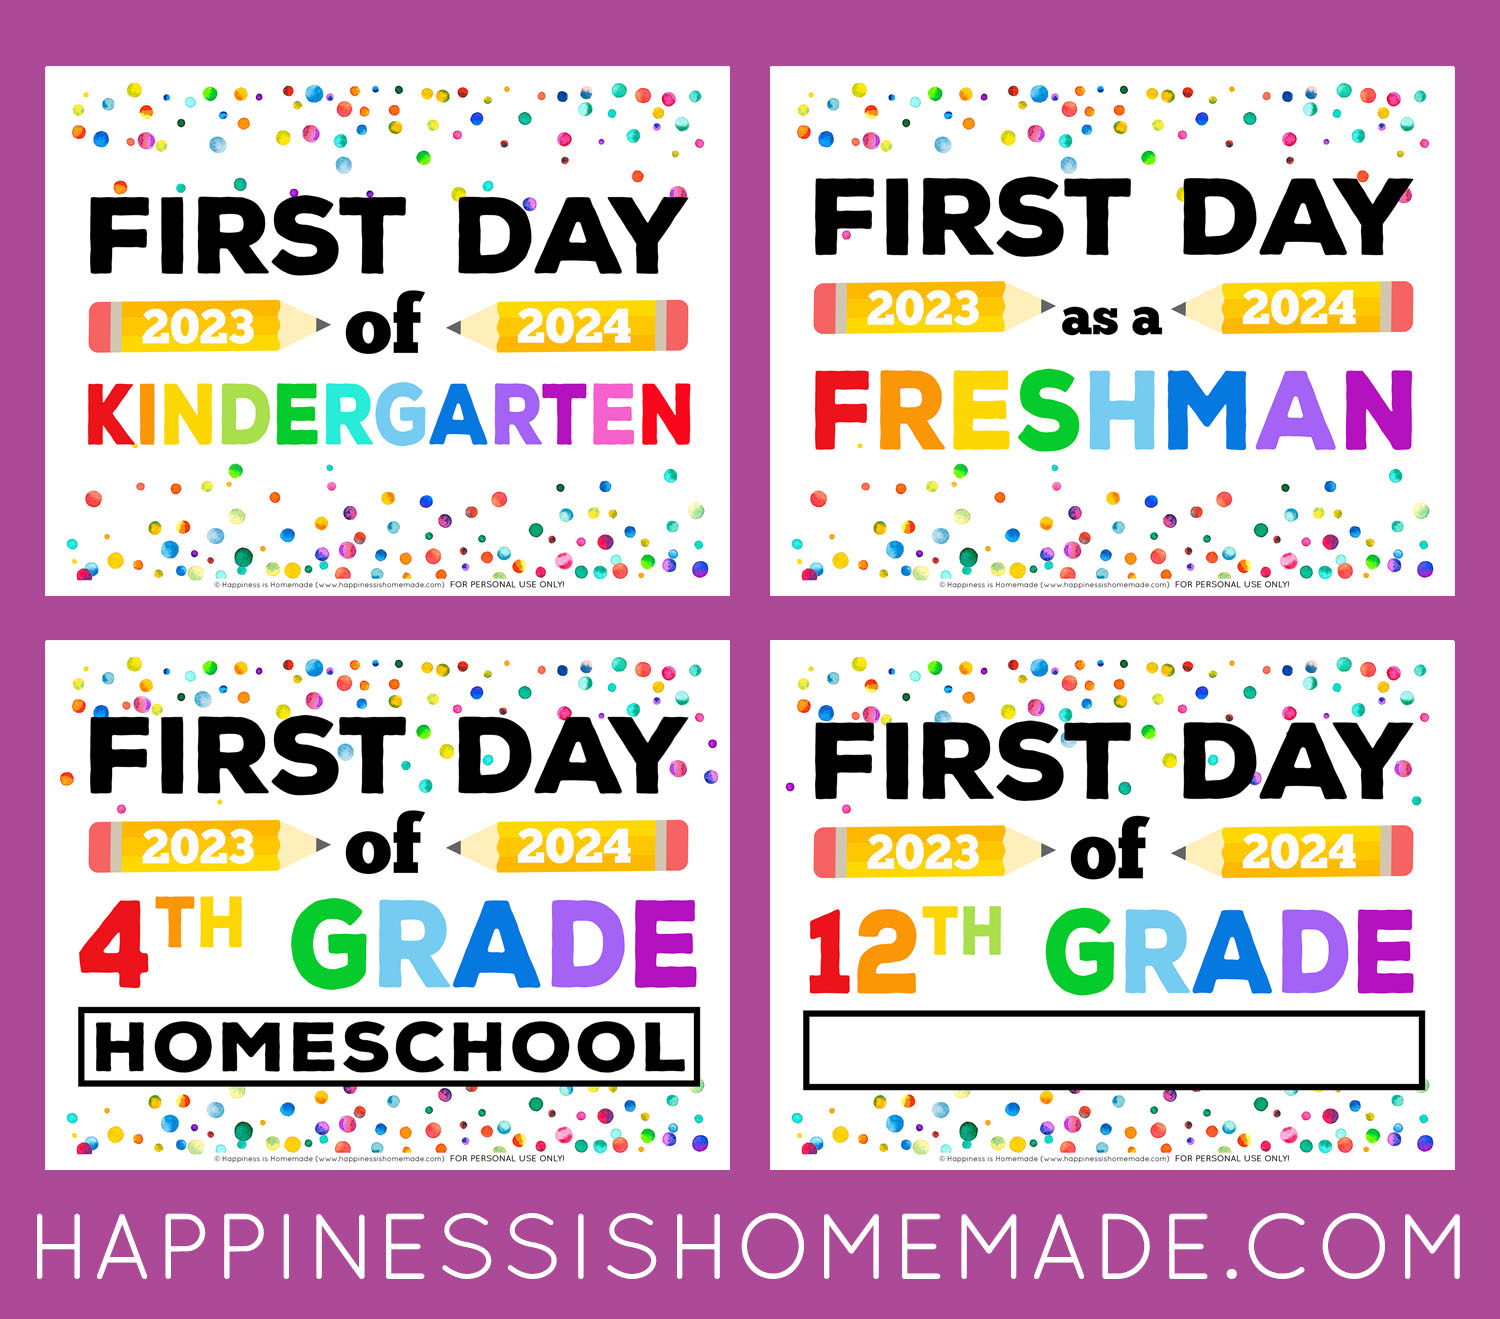 FREE Printables - Happiness is Homemade